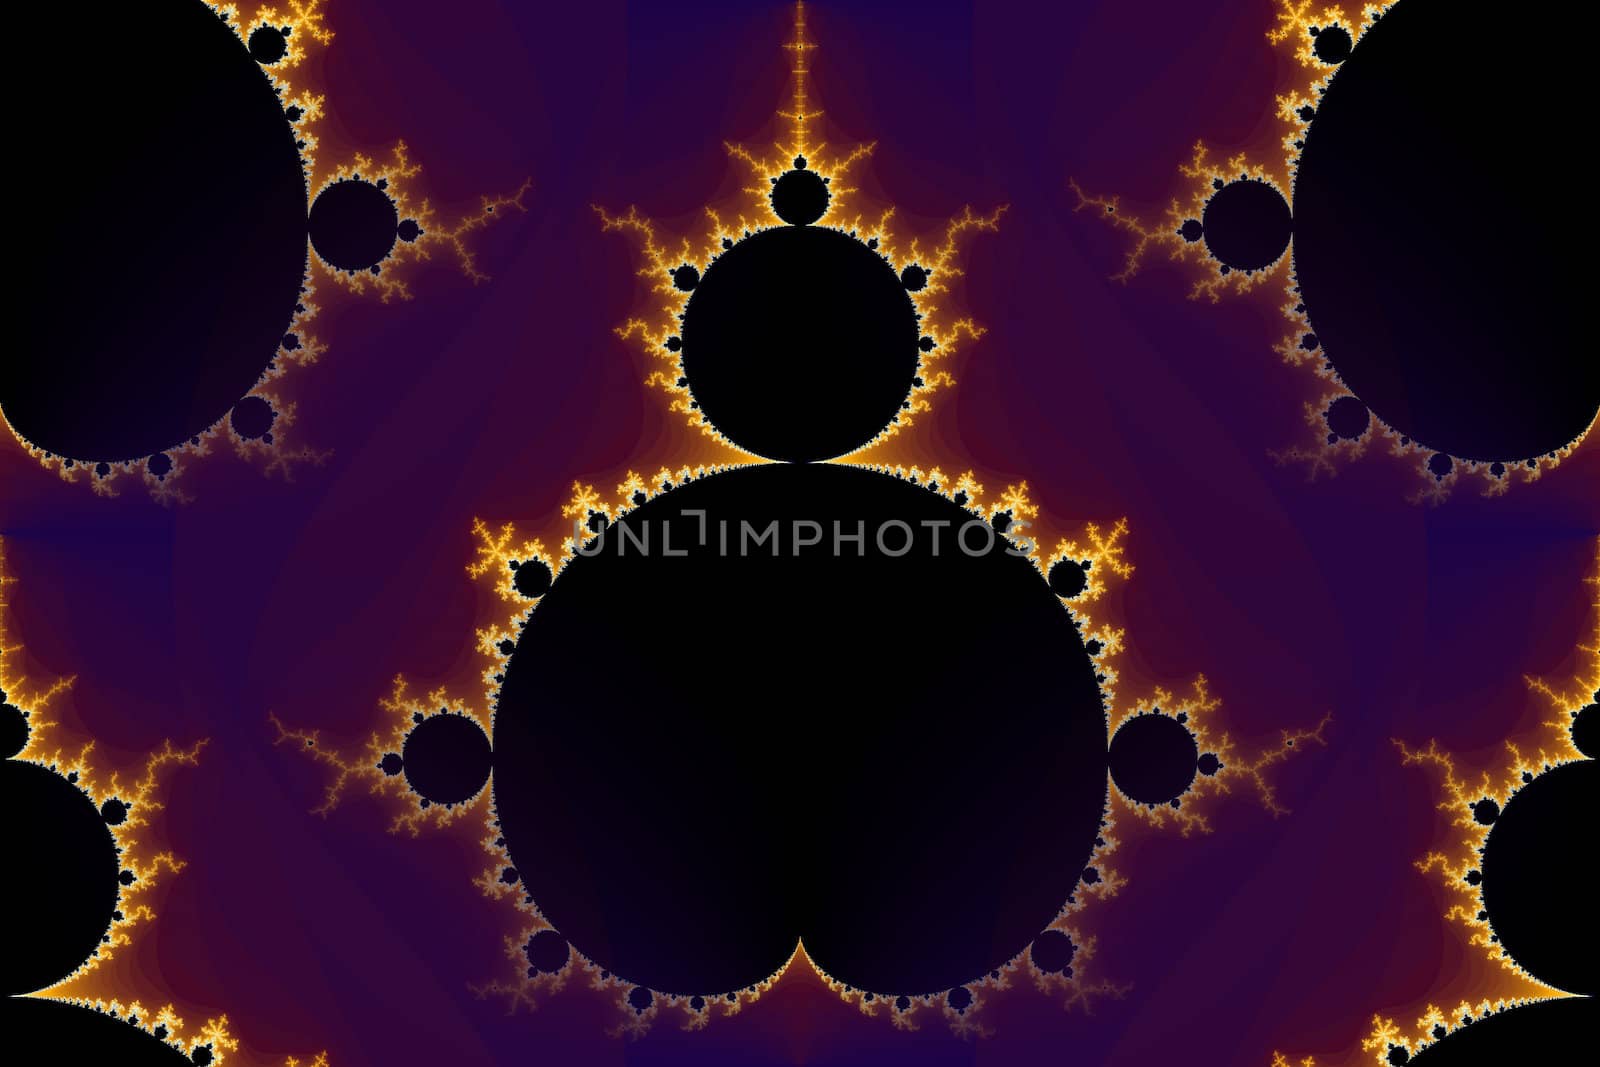 Mandelbrot fractal in the colors of purple golden yellow blue.